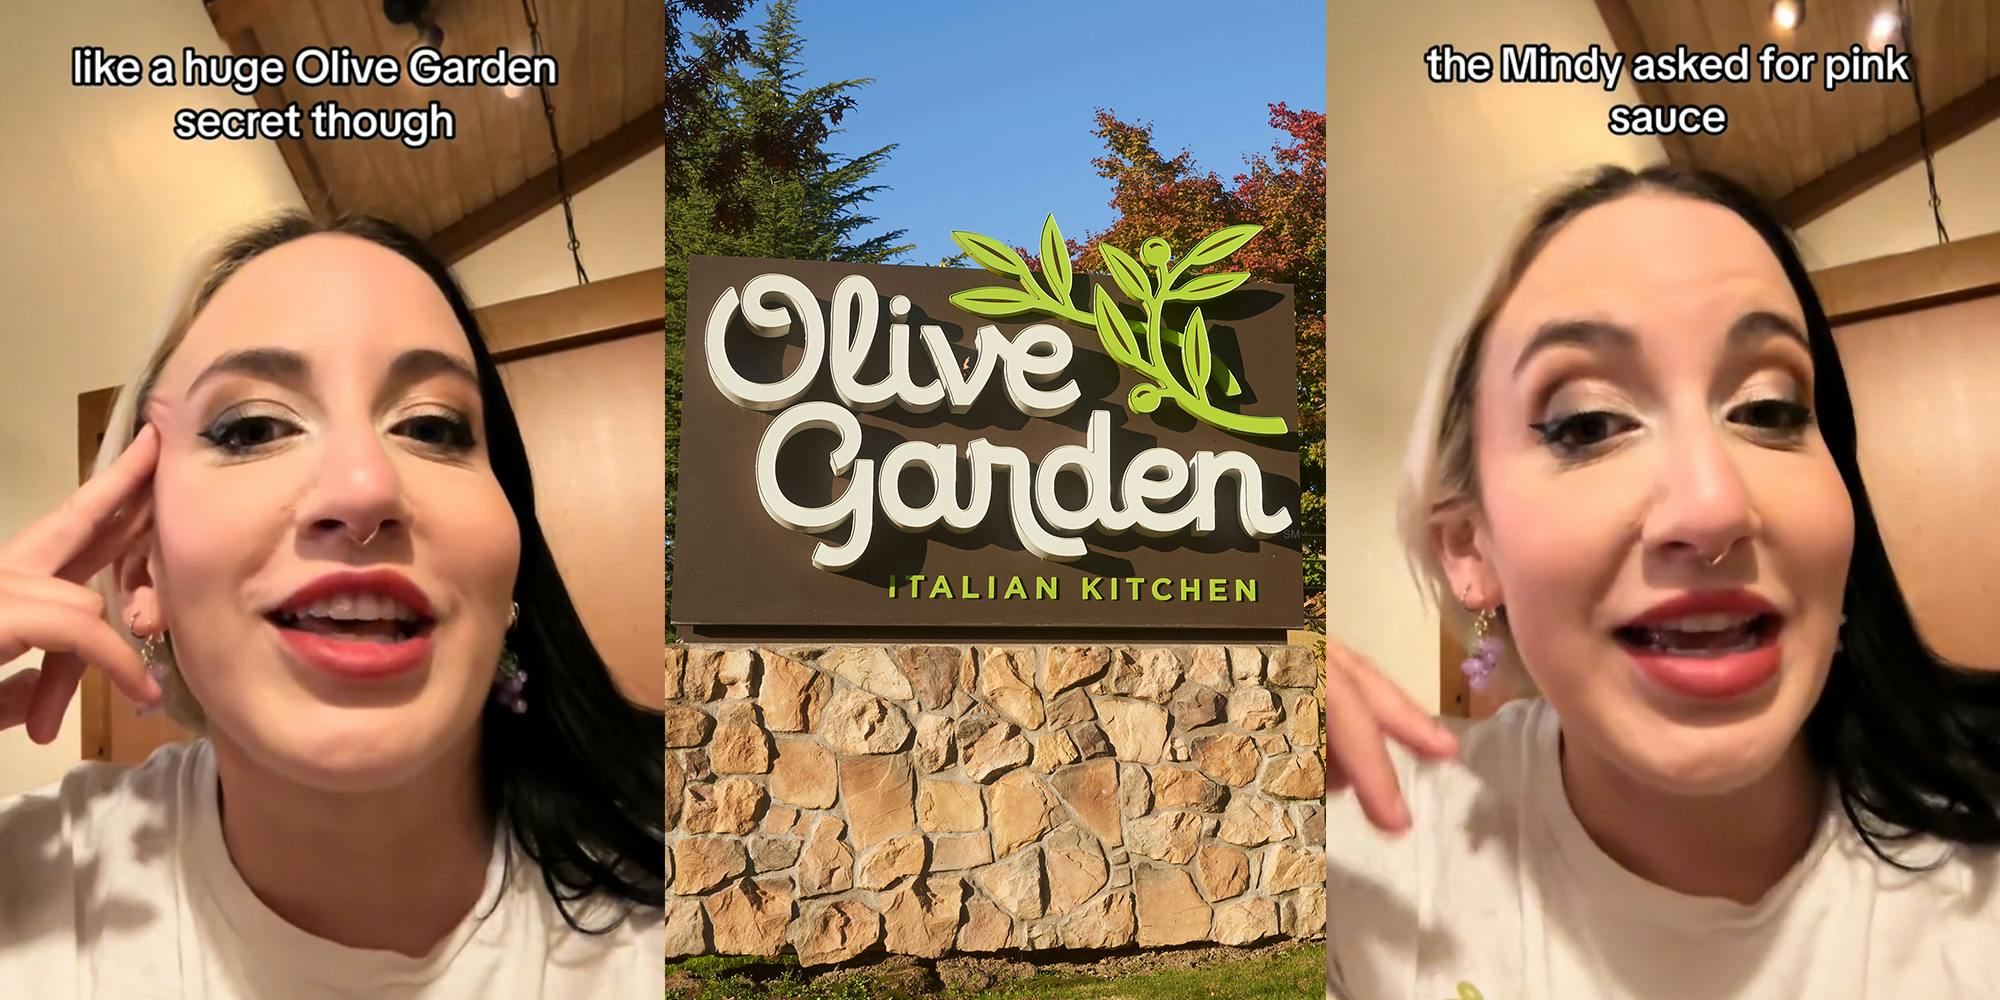 Olive Garden customer asks about pink sauce. Server exposes the recipe